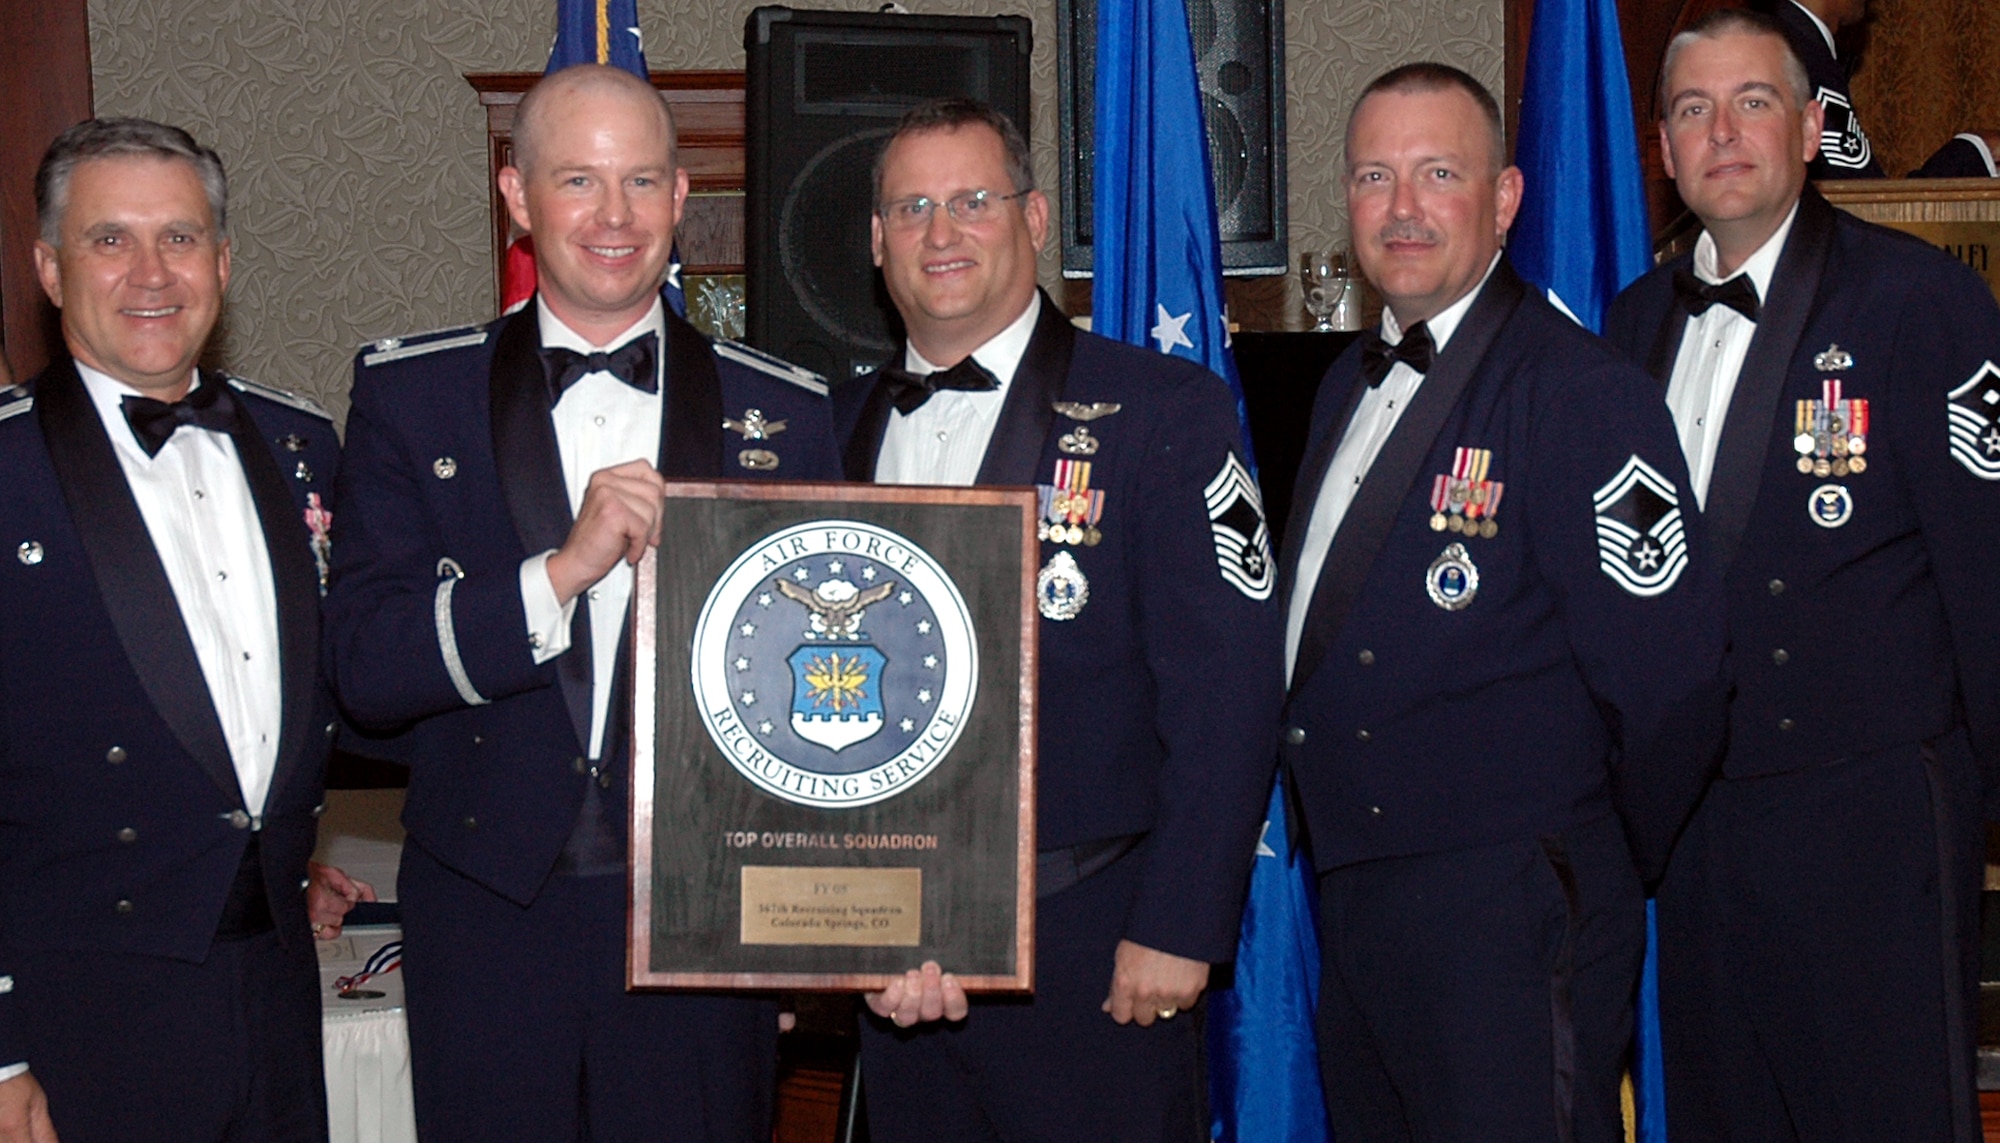 Lt. Col. Scott Maethner, 367th Recruiting Squadron commander, shows the Air Force Recruiting Service Top Overall Squadron award presented by Col. William Welch, left, mobilization assistant to the AFRS commander, at the unit’s annual awards banquet Oct. 20 in Estes Park, Colo. Also accepting the award on behalf of the unit are, from center to right, Chief Master Sgt. John Mellon, superintendent; Senior Master Sgt. James Roulette, production superintendent, and Master Sgt. Kurt Stoefen, first sergeant. (U.S. Air Force photo)